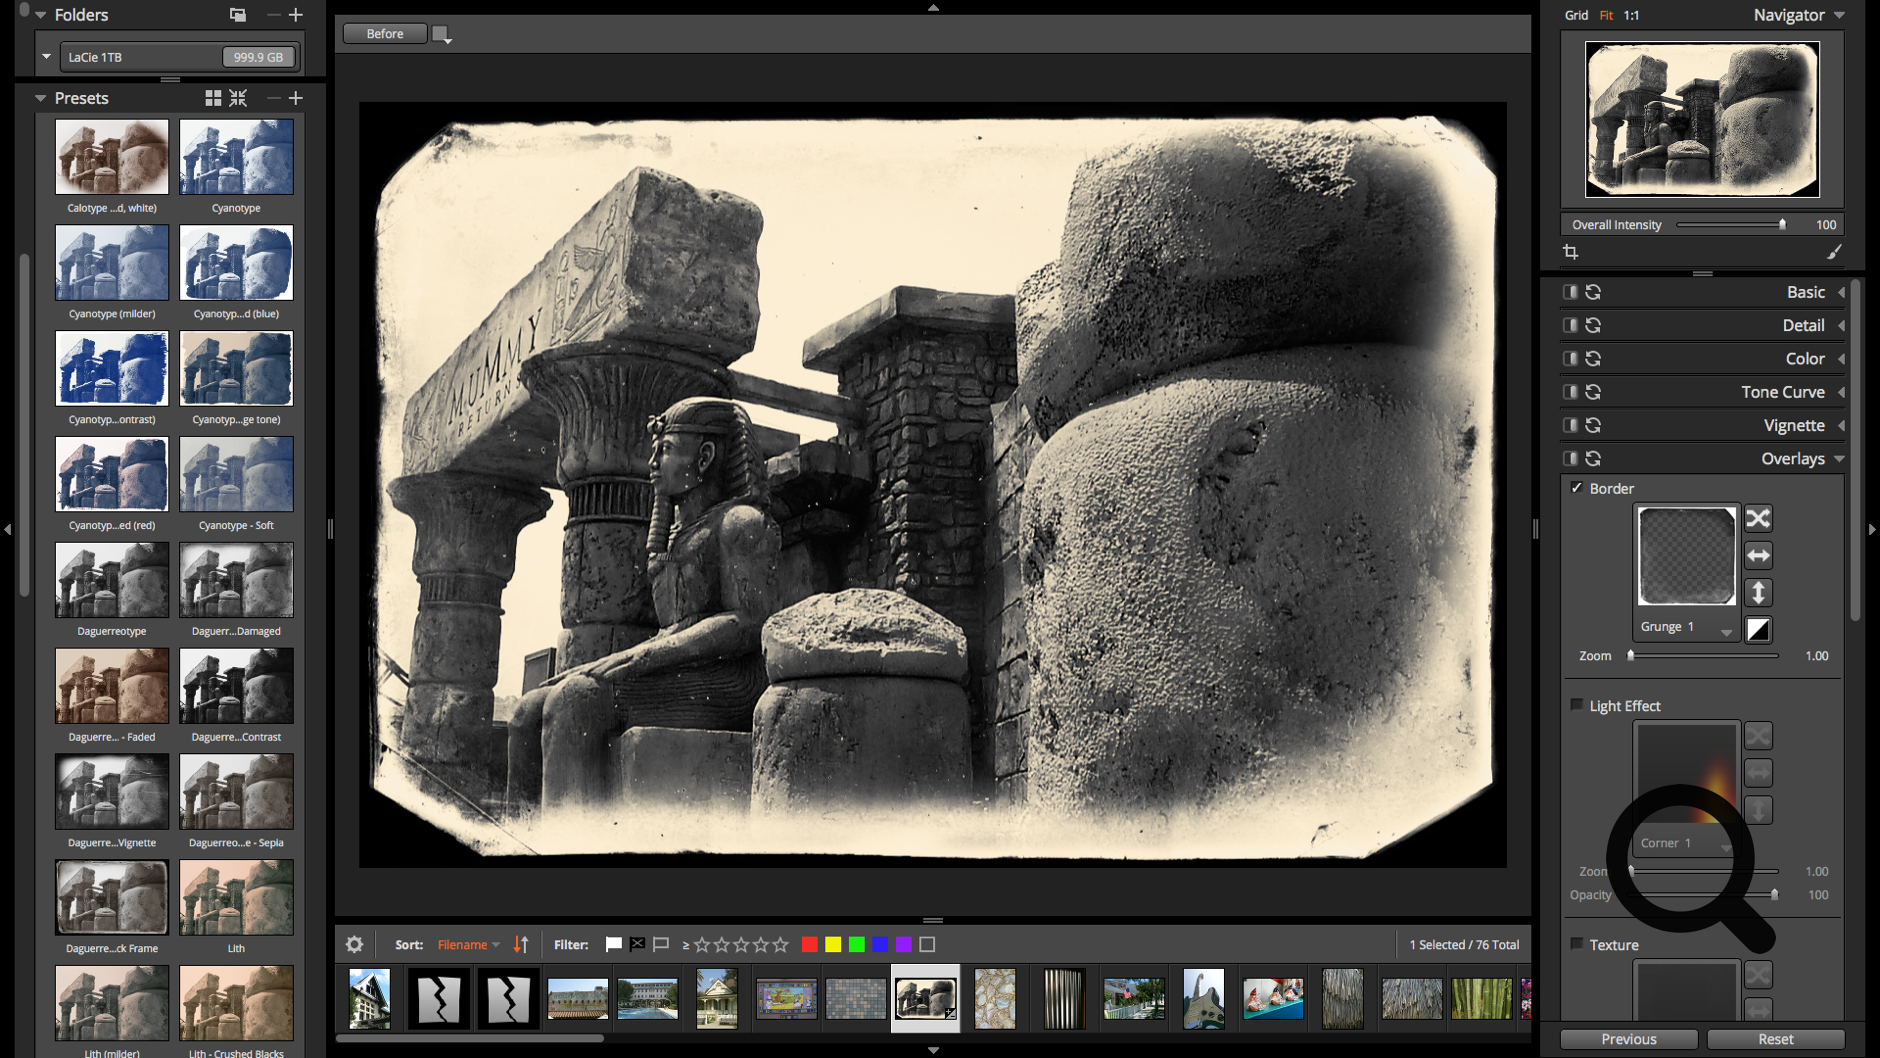 Screenshot of the Alien Skin Photo Bundle showing the results of a preset applied to an Egyptian temple